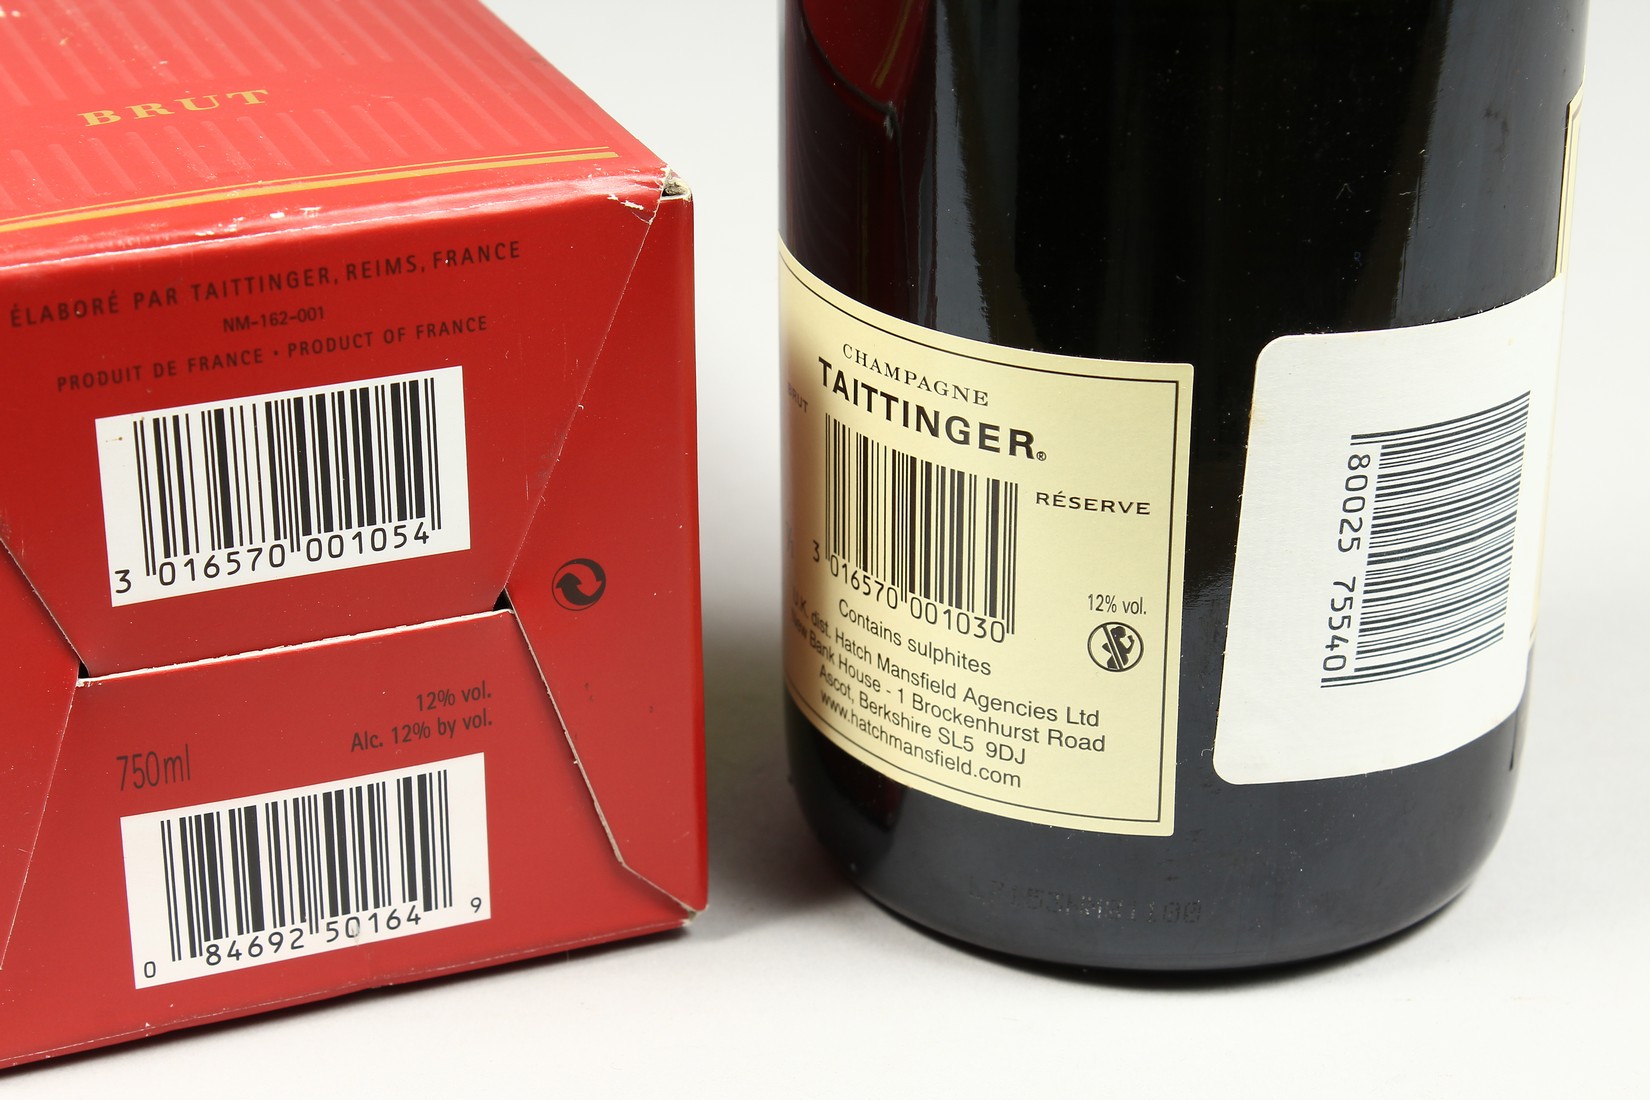 A BOTTLE OF TATTINGER CHAMPAGNE in an unopened box. - Image 7 of 8